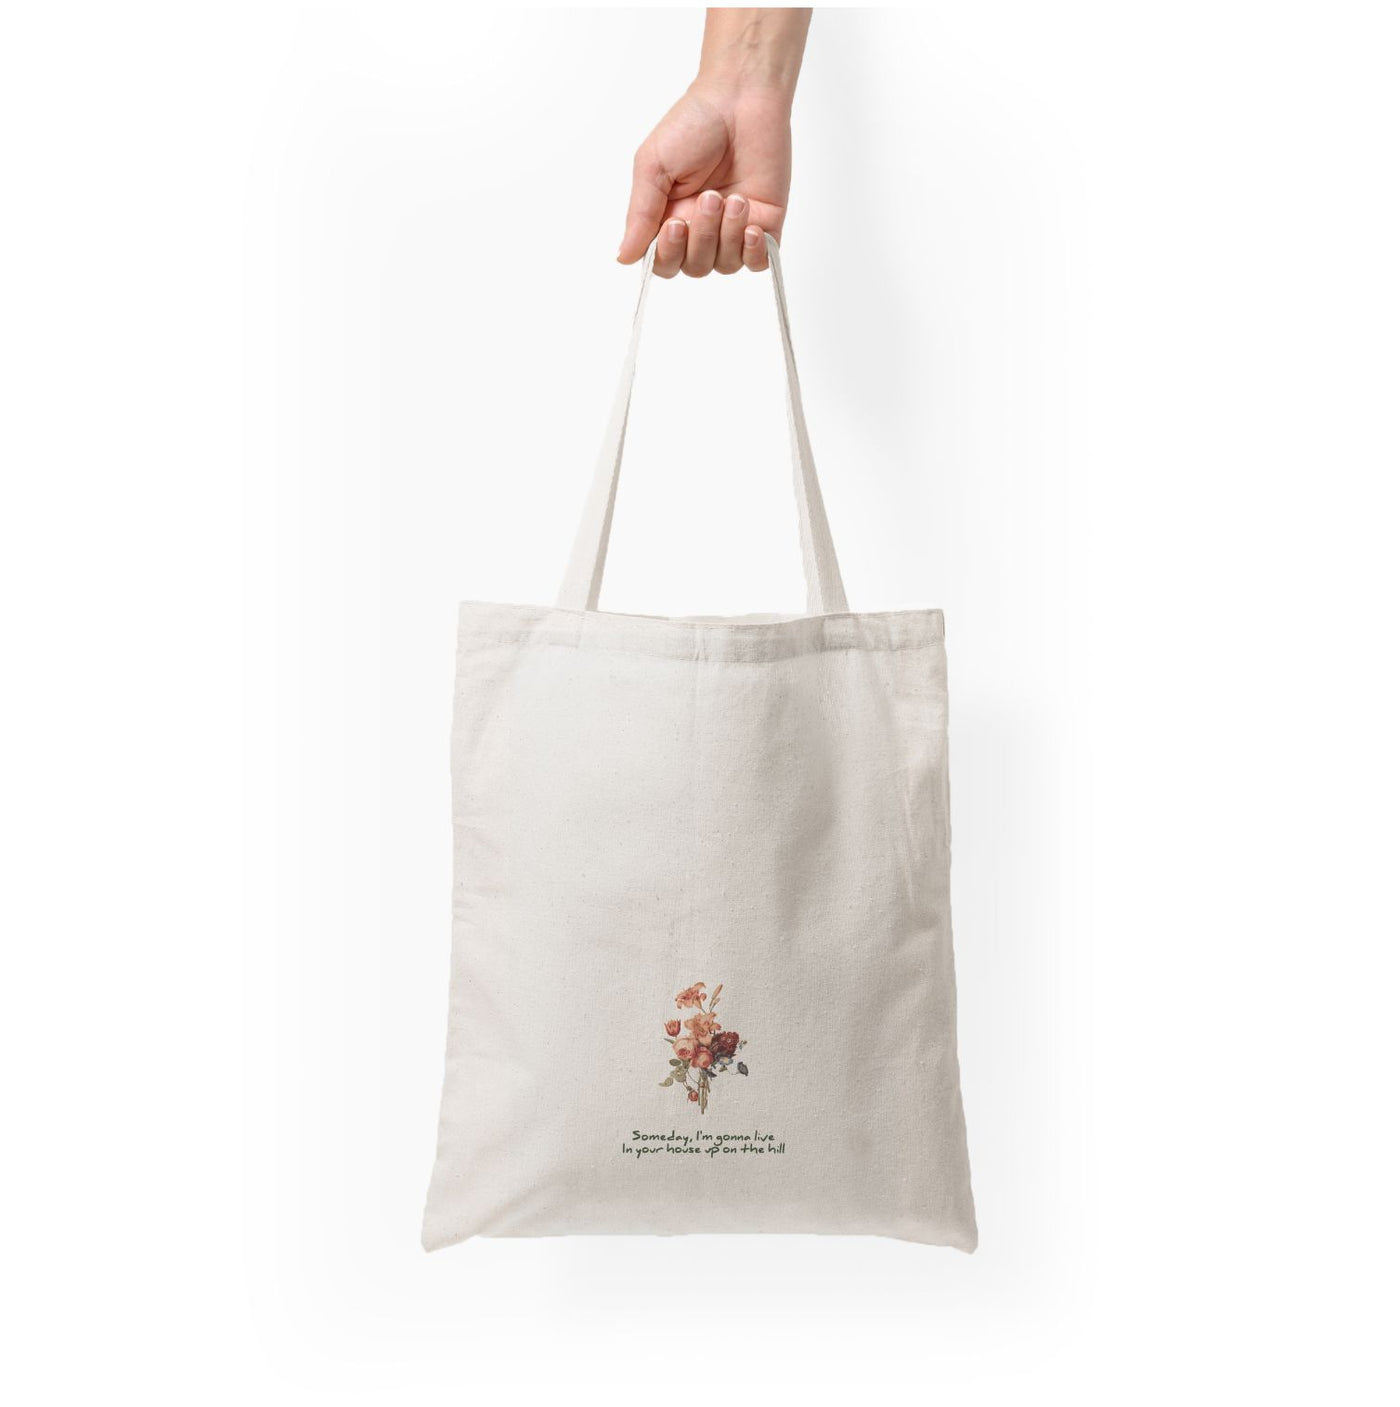 House Up On The Hill - Phoebe Bridgers Tote Bag